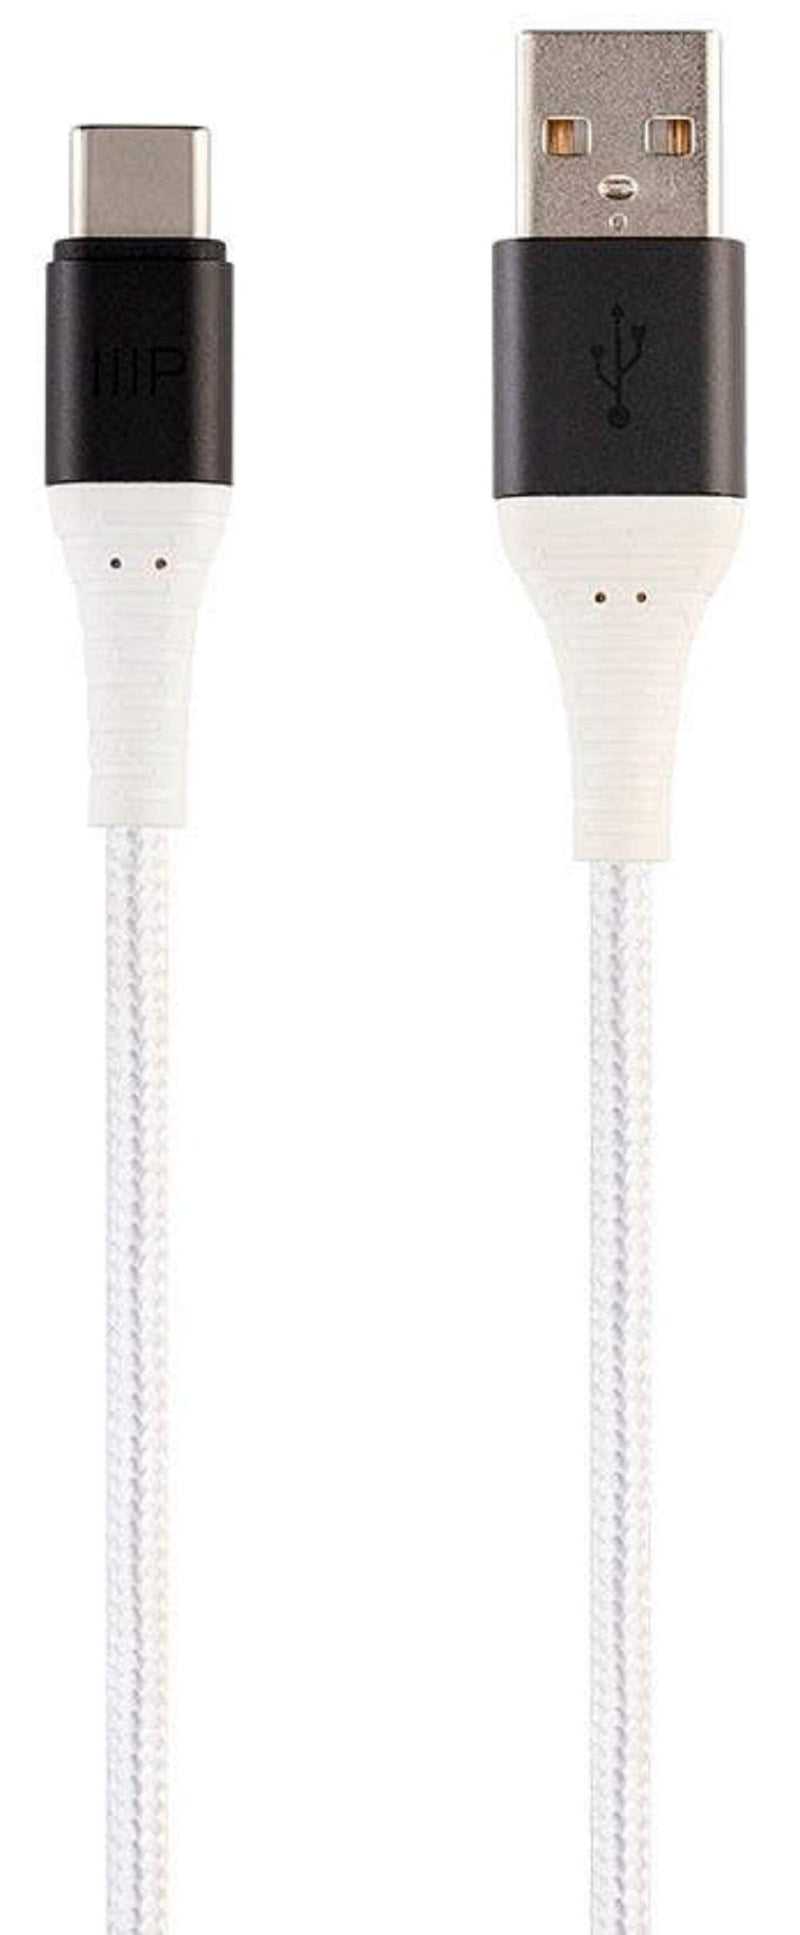  [AUSTRALIA] - Monoprice 138314 USB 2.0 Type C to Type A Charge and Sync Cable - 3 Feet - White, Durable, Kevlar-Reinforced Nylon-Braid - AtlasFlex Series USB-C to USB-A